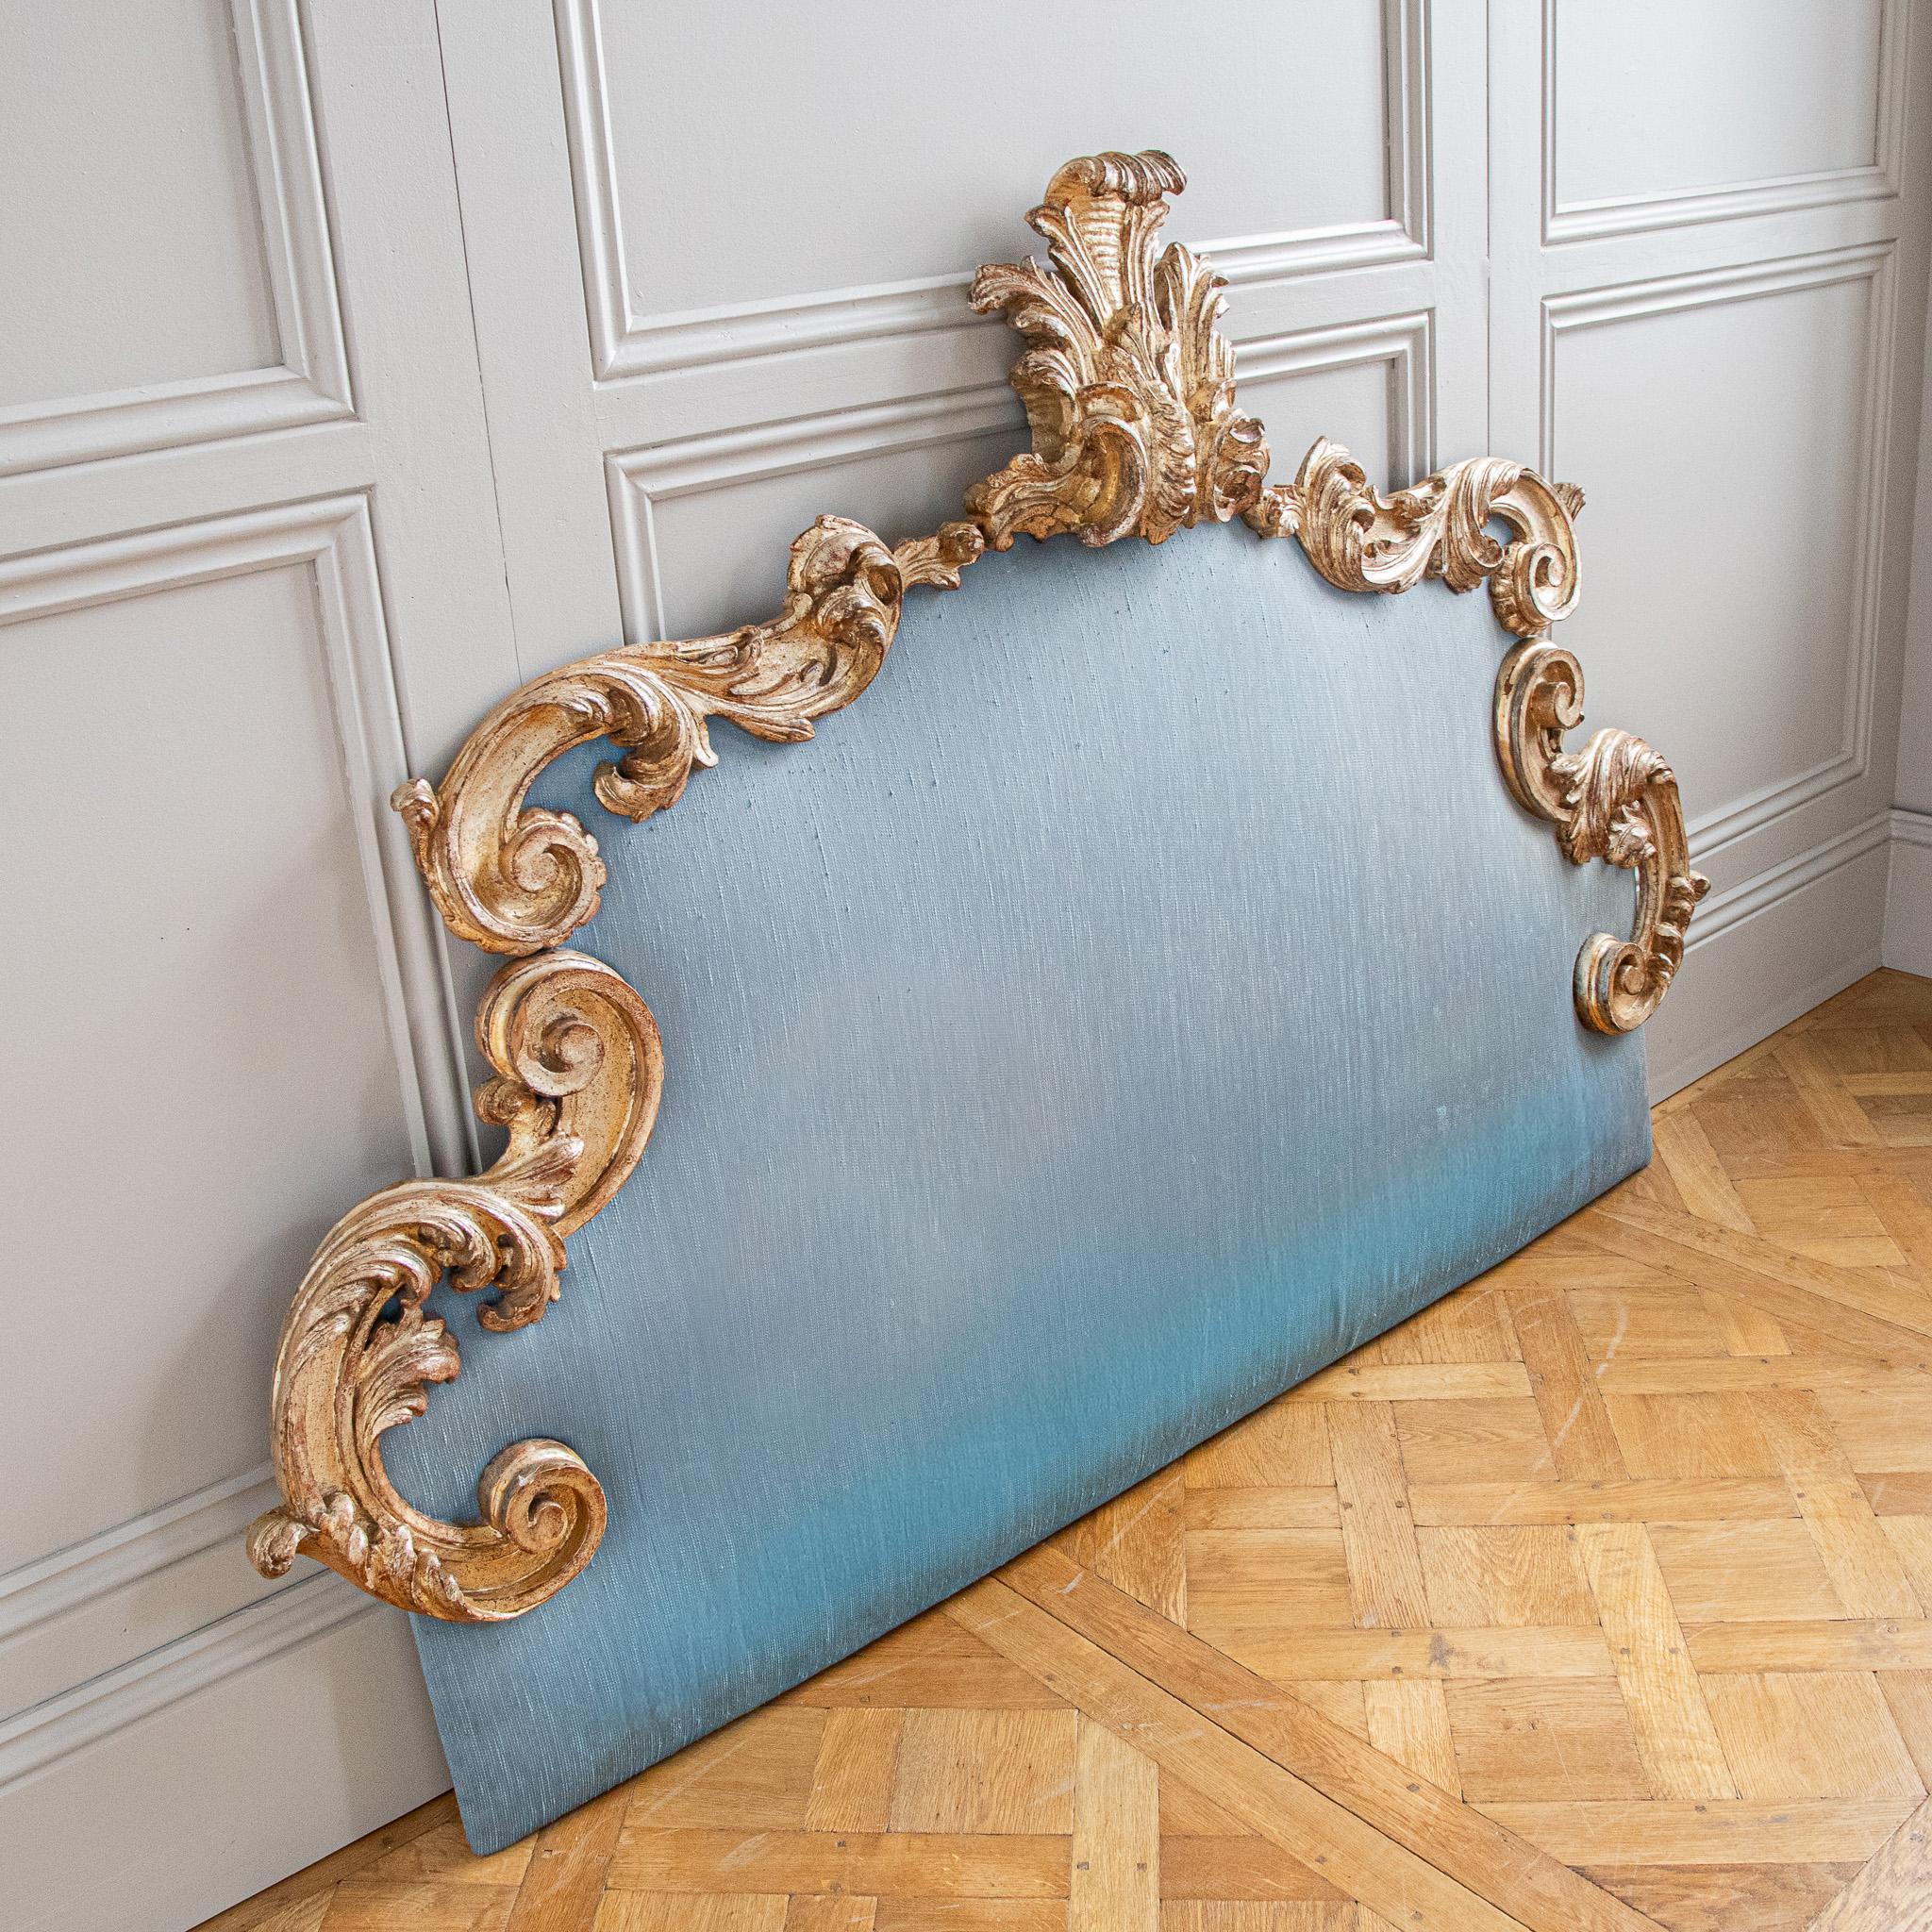 Circa early 1900's Italian Rococo Style Large Gilt-wood Headboard In Good Condition For Sale In London, Park Royal